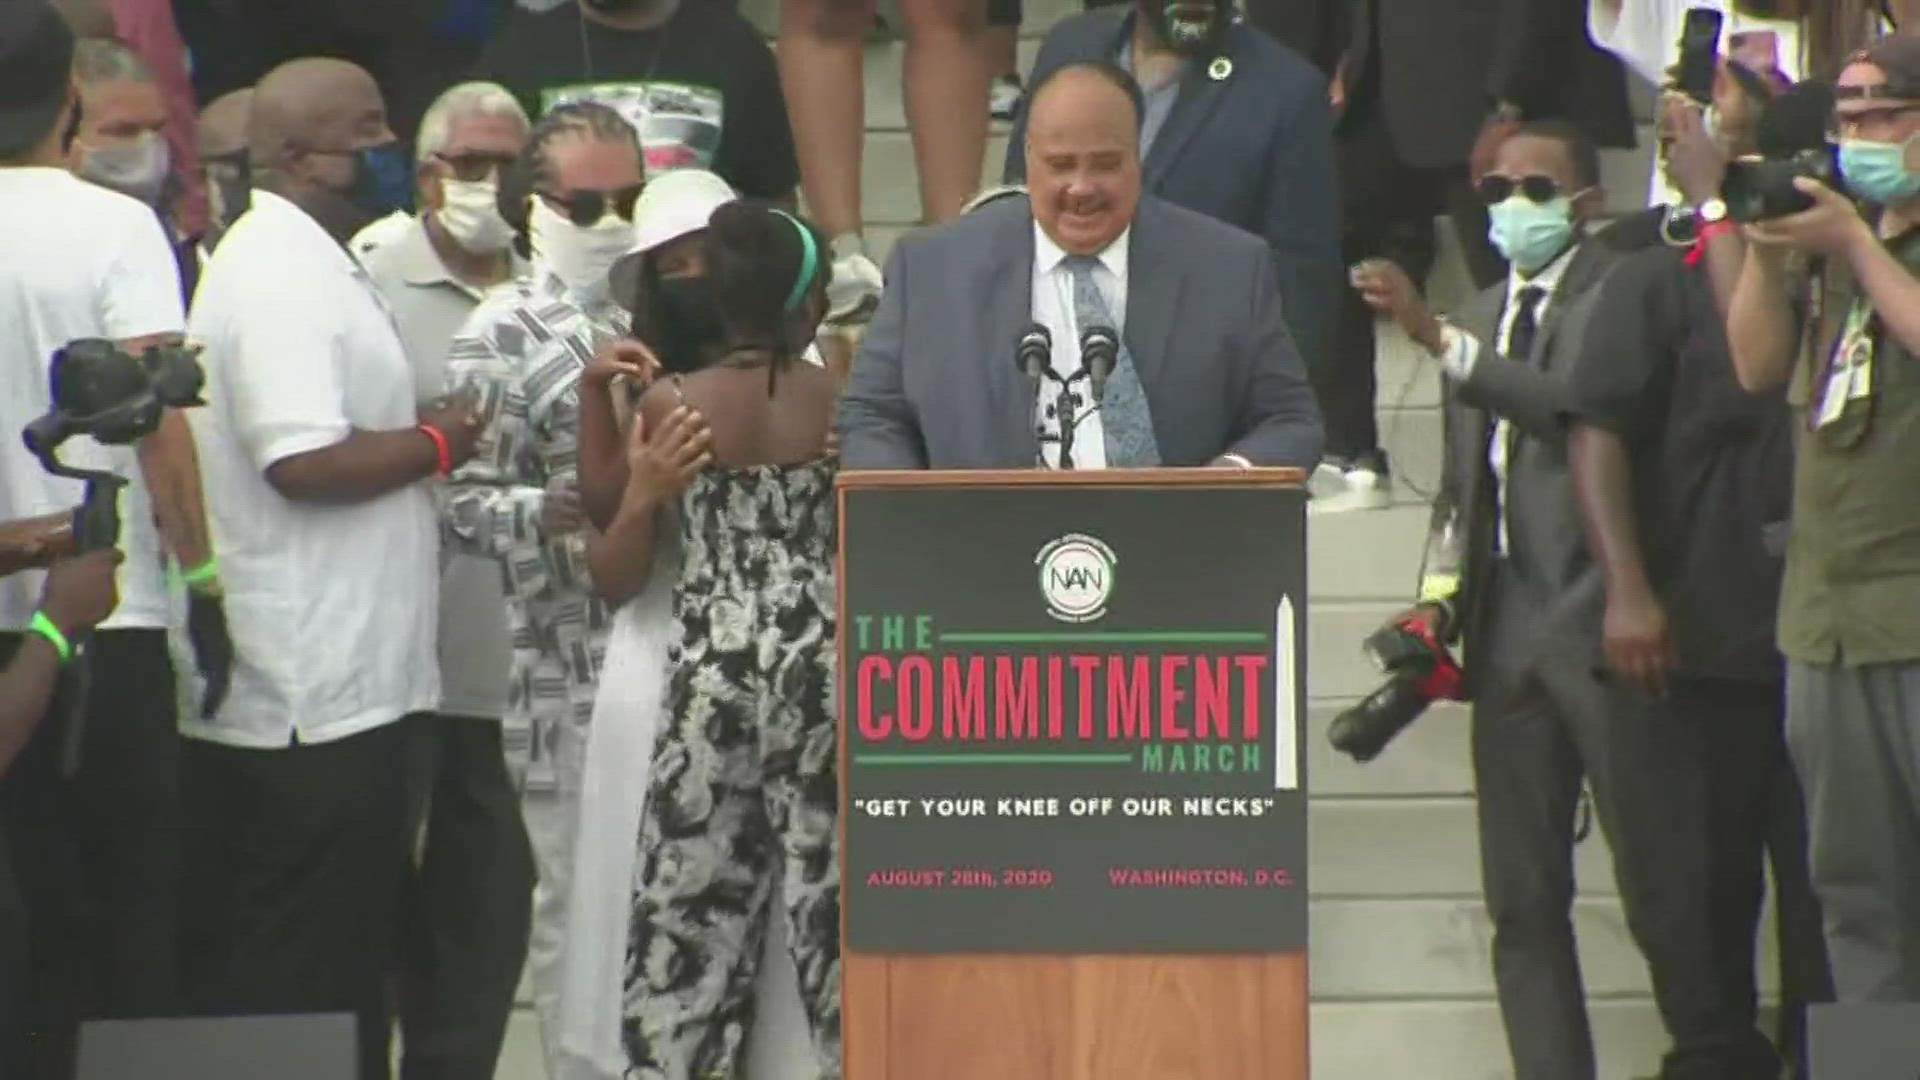 Martin Luther King III speaks at the Commitment March on the 57th anniversary of his father's March on Washington.